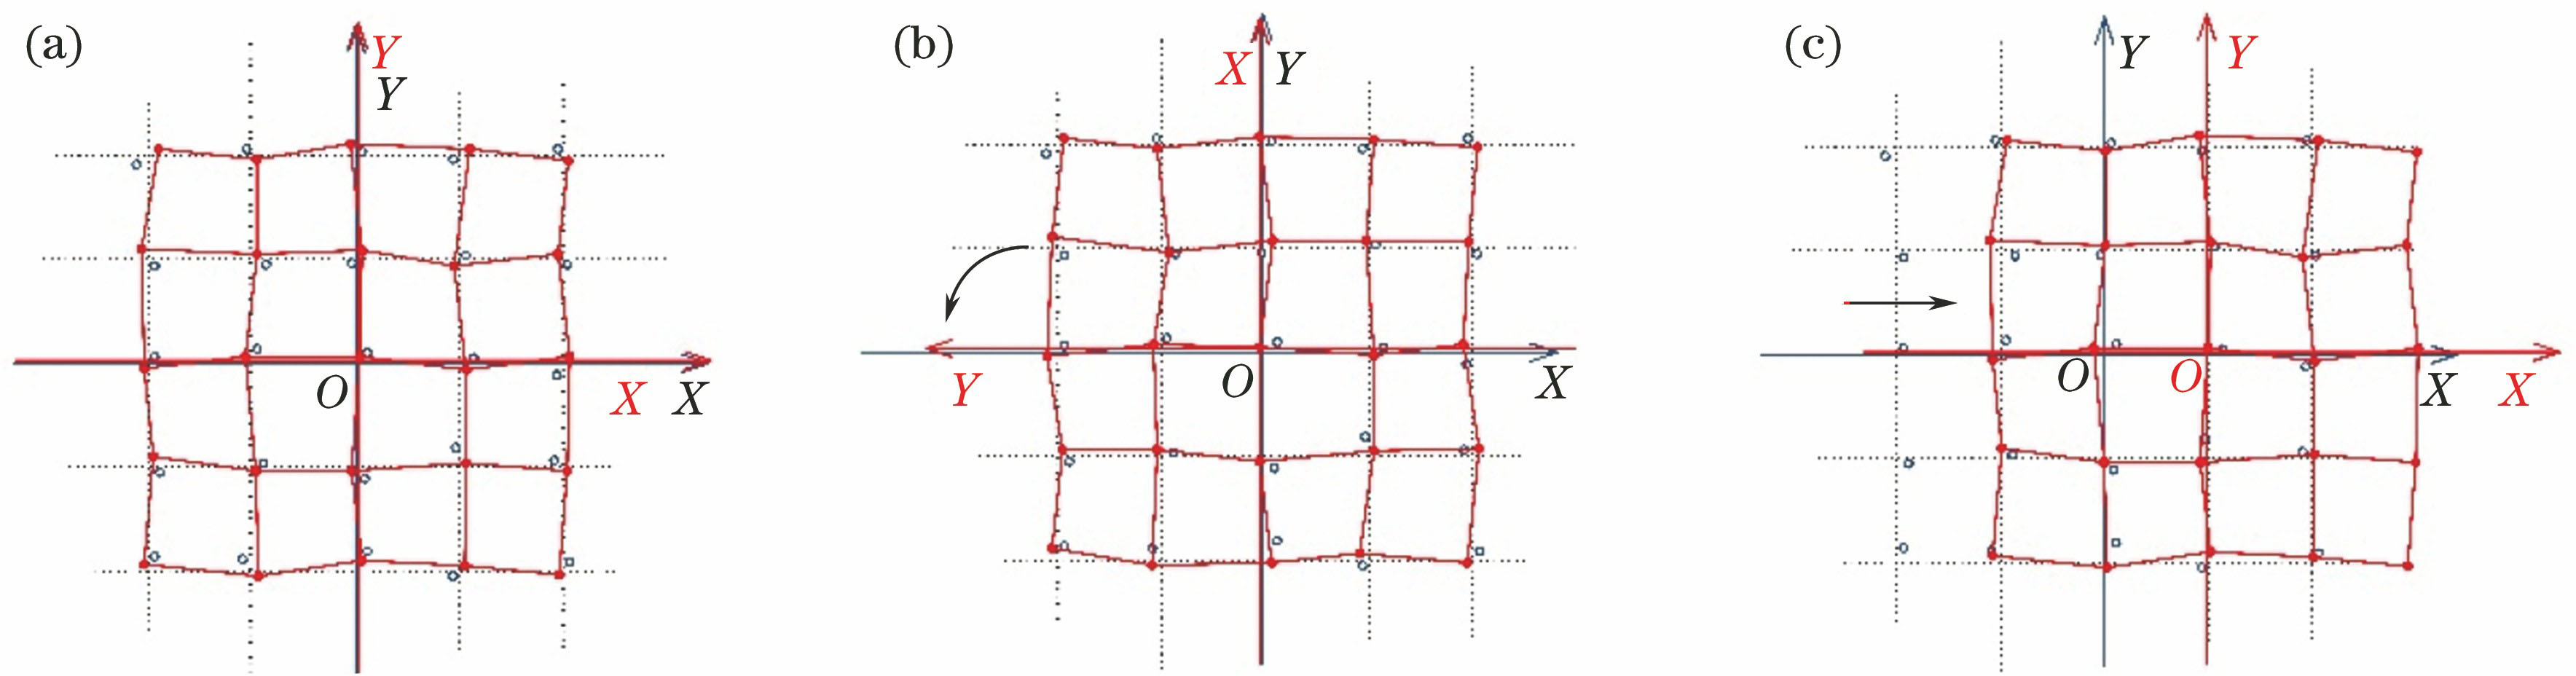 Schematic of positions of grid plate for self-calibration. (a) Initial position; (b) rotation of 90°; (c) translation